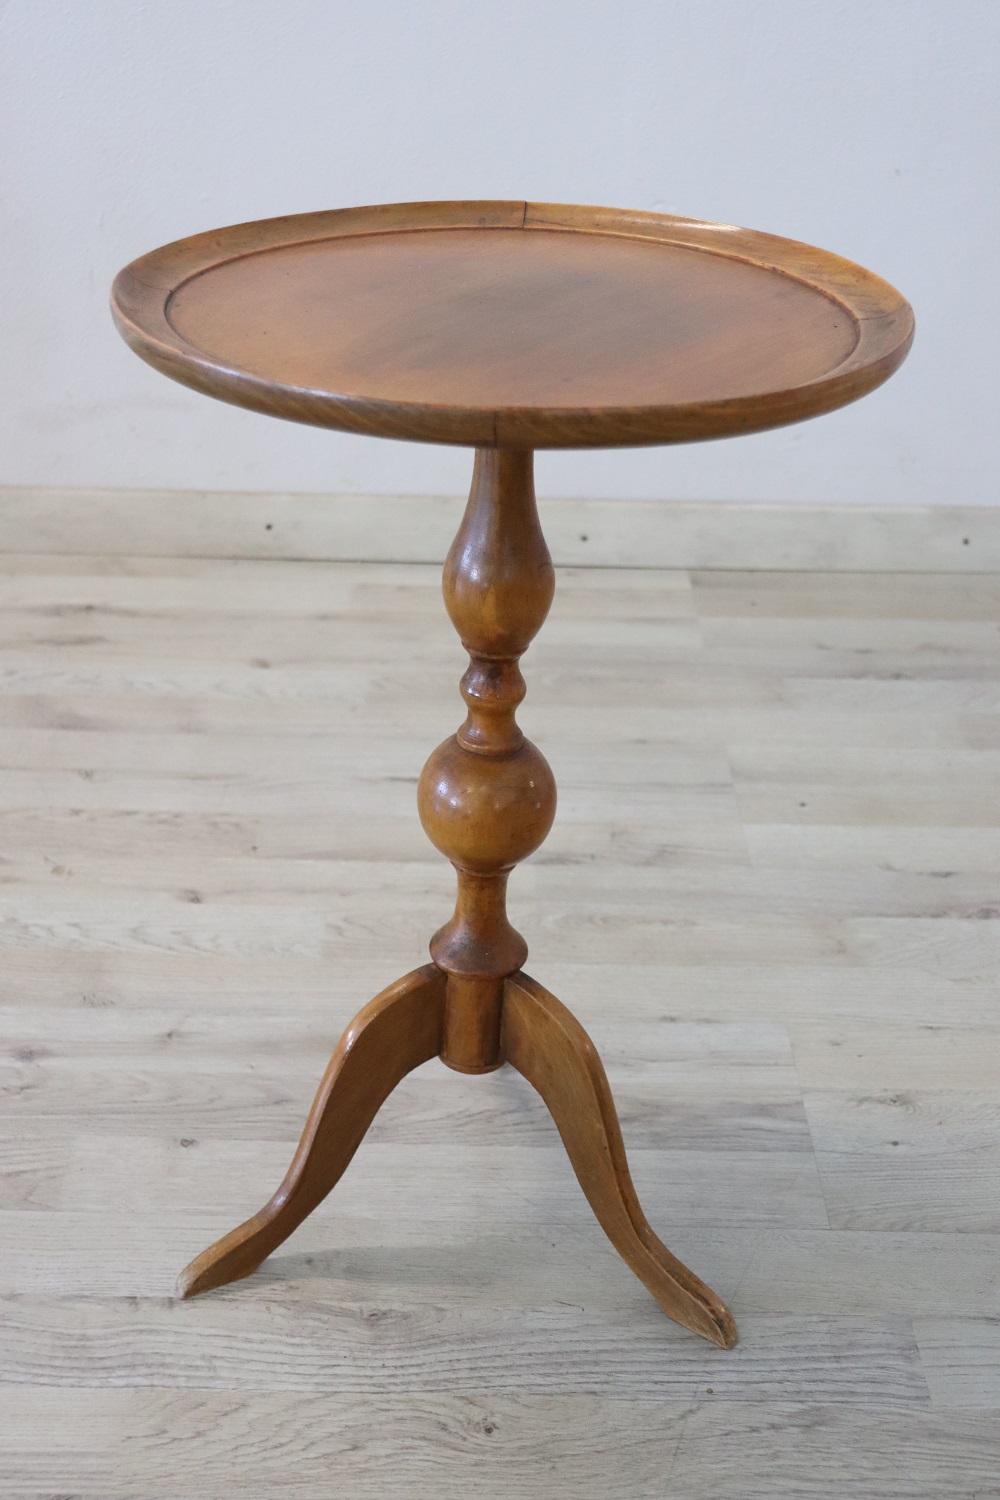 Louis Philippe 19th Century Italian L Philippe Beech Wood Round Pedestal Table or Smoking Table For Sale